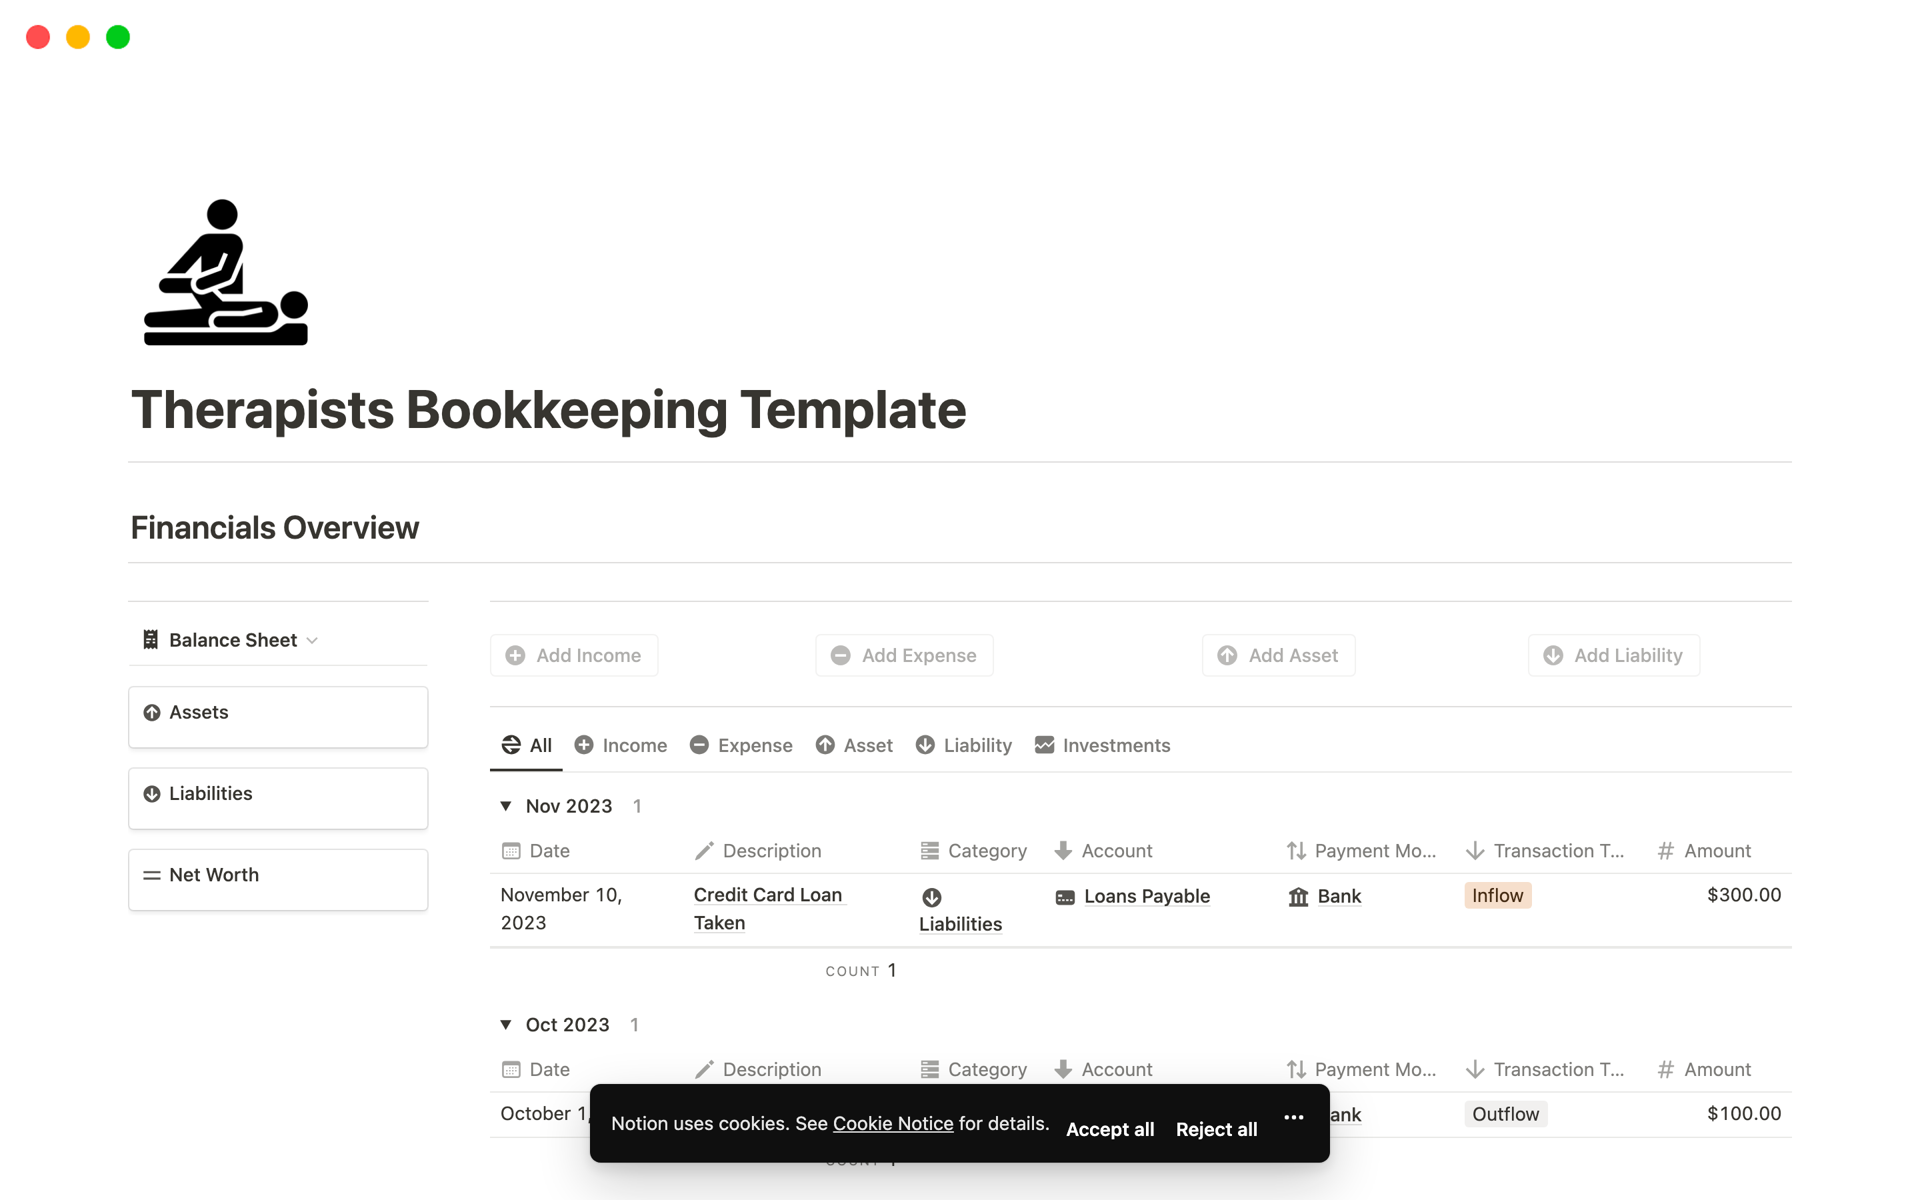 This bookkeeping template provides best solution for therapists to manage their business finances, produce income statement, balance sheet, cash flow statement and much more on a periodical basis.